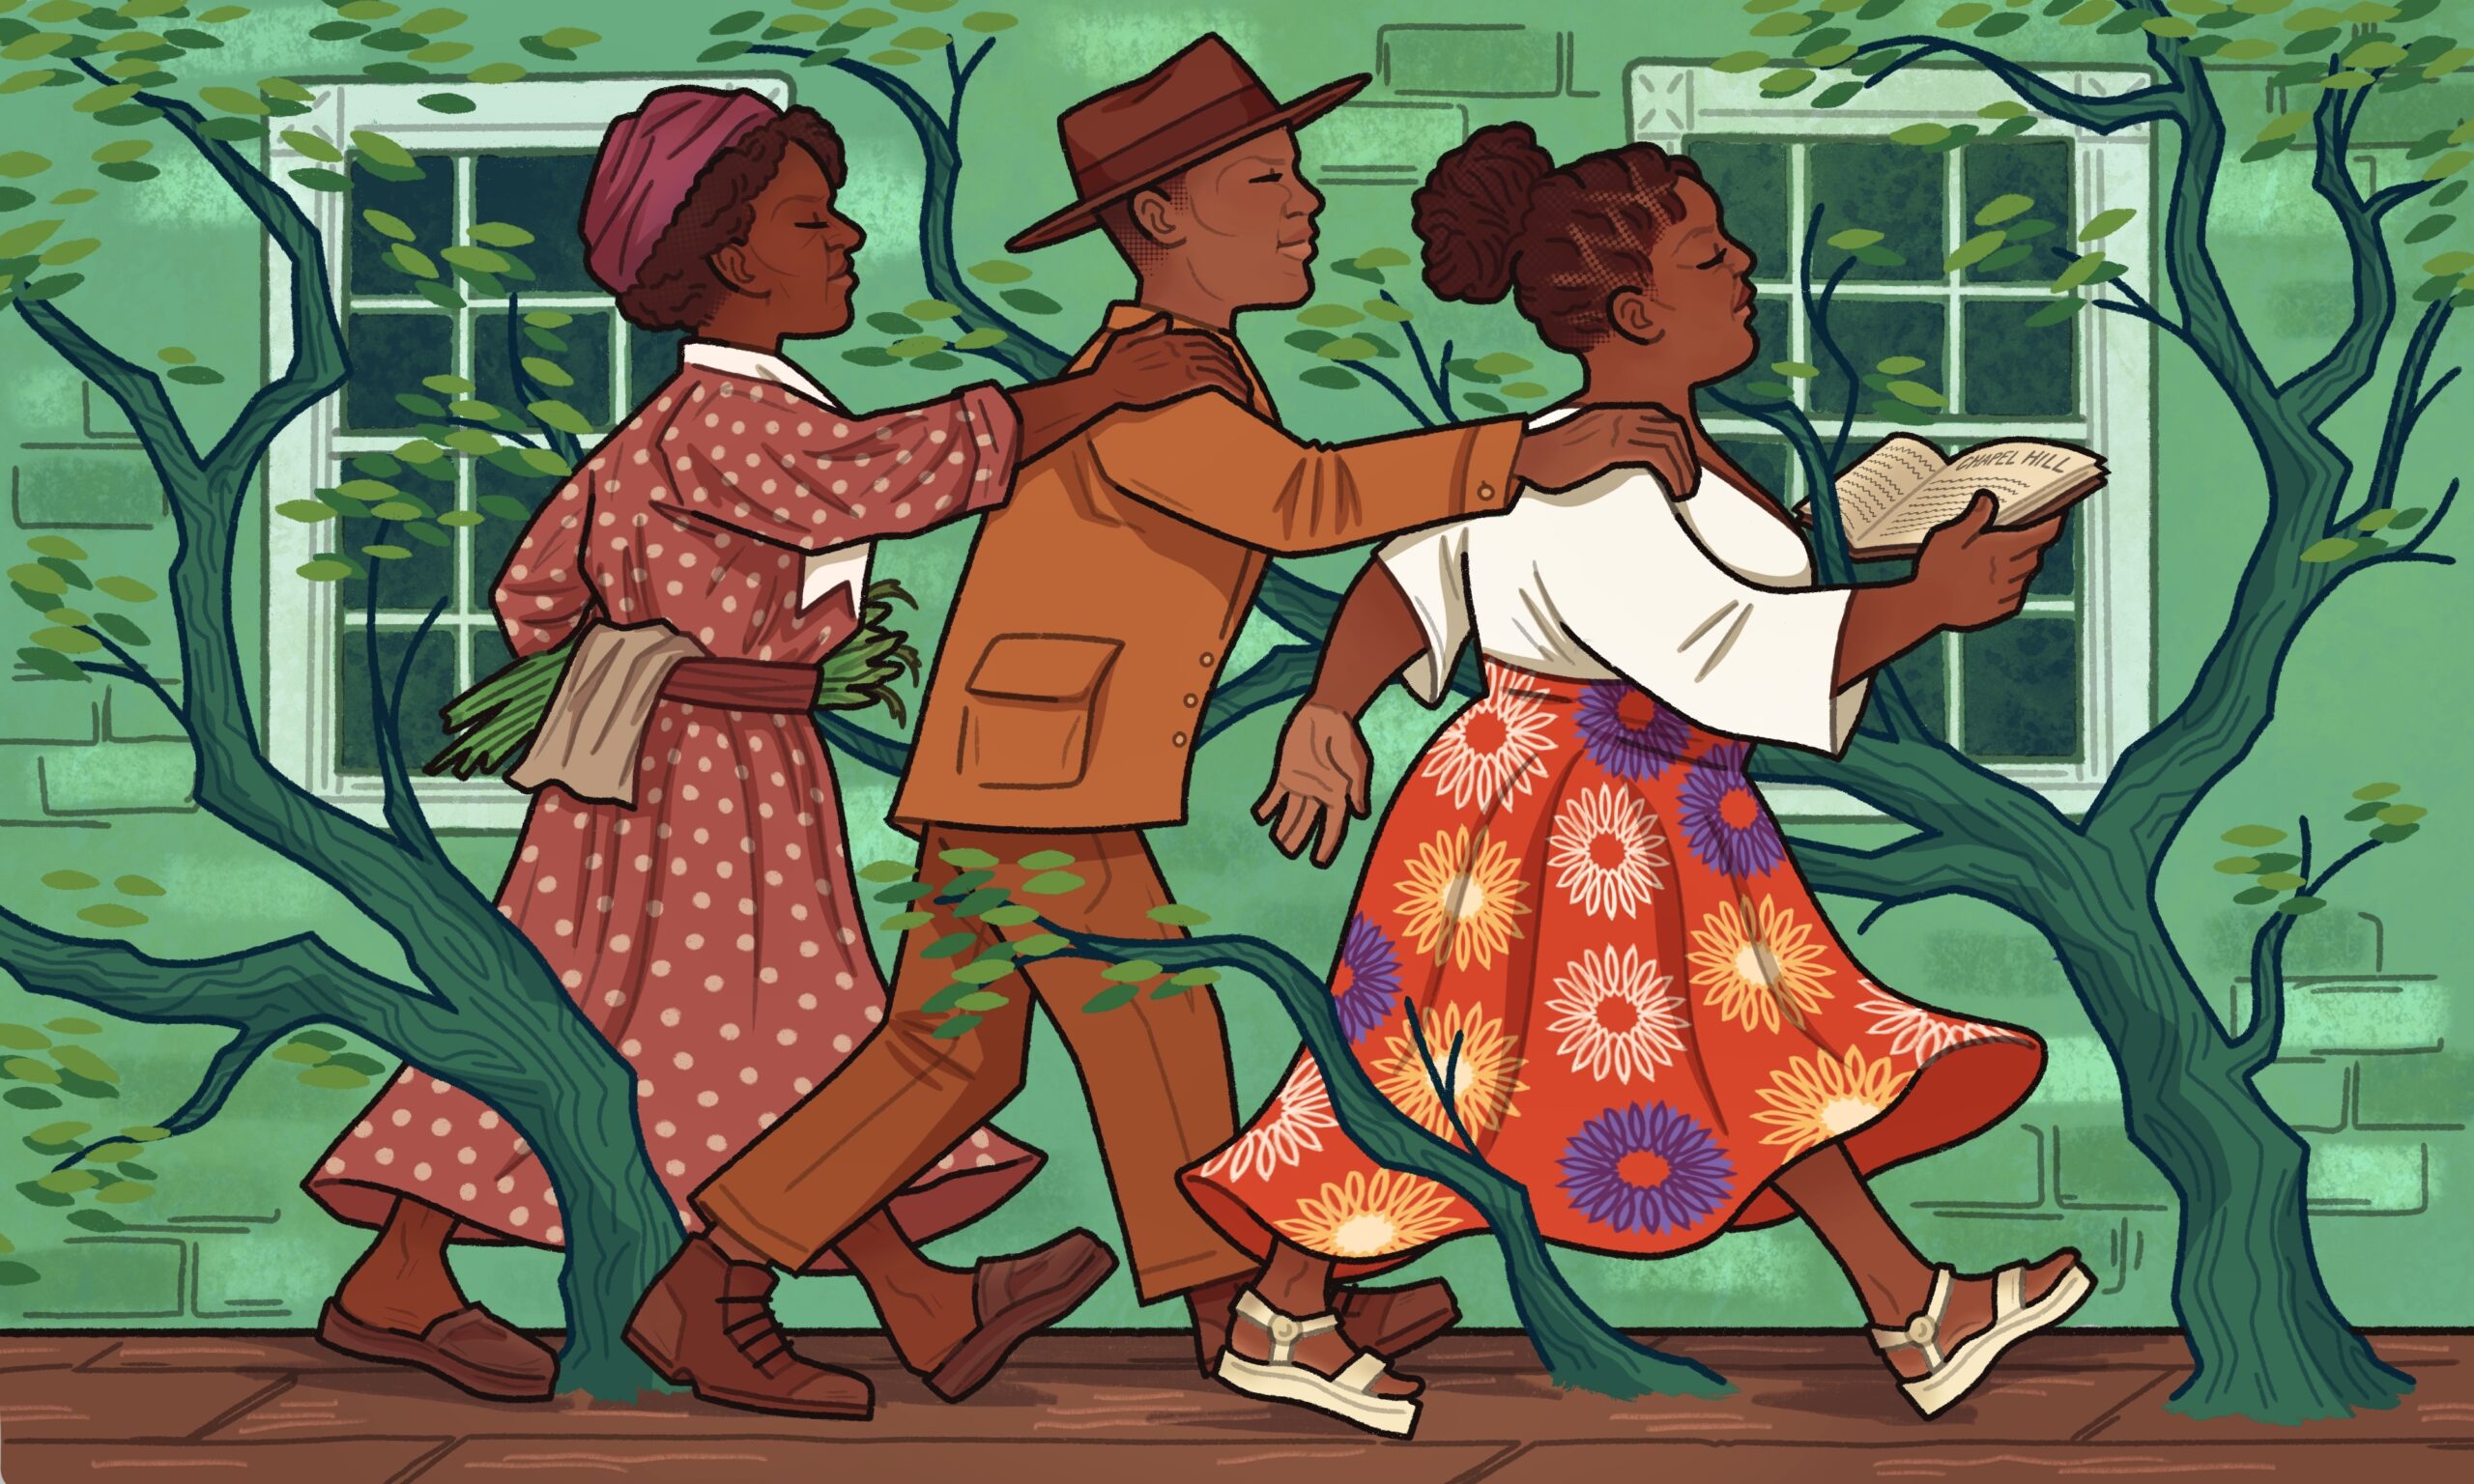 In the illustration, there are three figures striding forward through the nature and structure of the home in Chapel Hill. The first figure, Danita Mason-Hogans, is supported and steadied by the hands of her ancestors—one from the Civil Rights era, and the other from the time of enslavement. They have confident but calm expressing, and Danita holds a history book in her hand about Chapel Hill. Around them, there are trees sprouting from the ground, green bark and bright leaves. And behind you can see windows and bricks to represent the house.